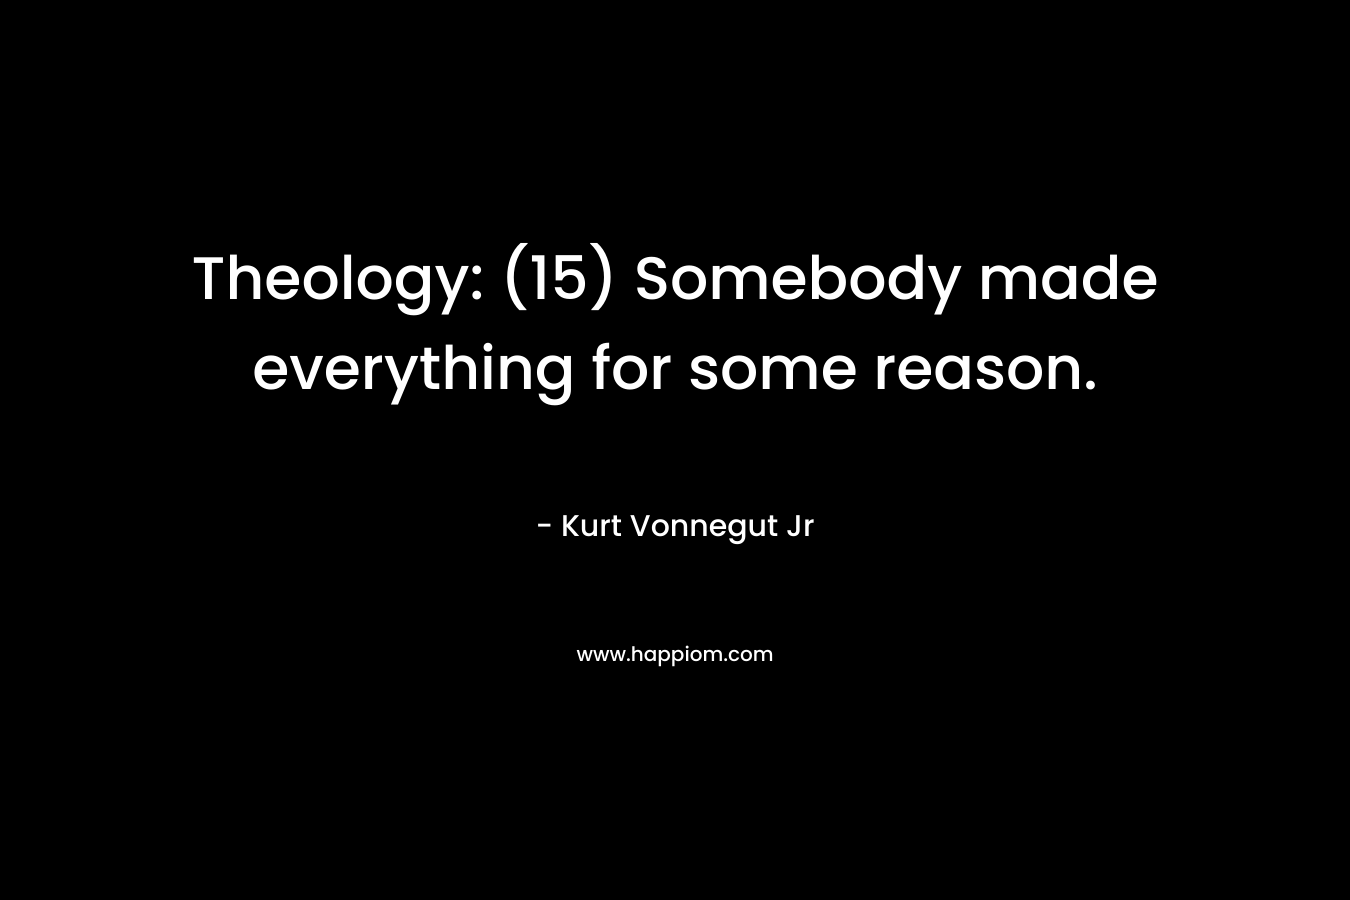 Theology: (15) Somebody made everything for some reason.